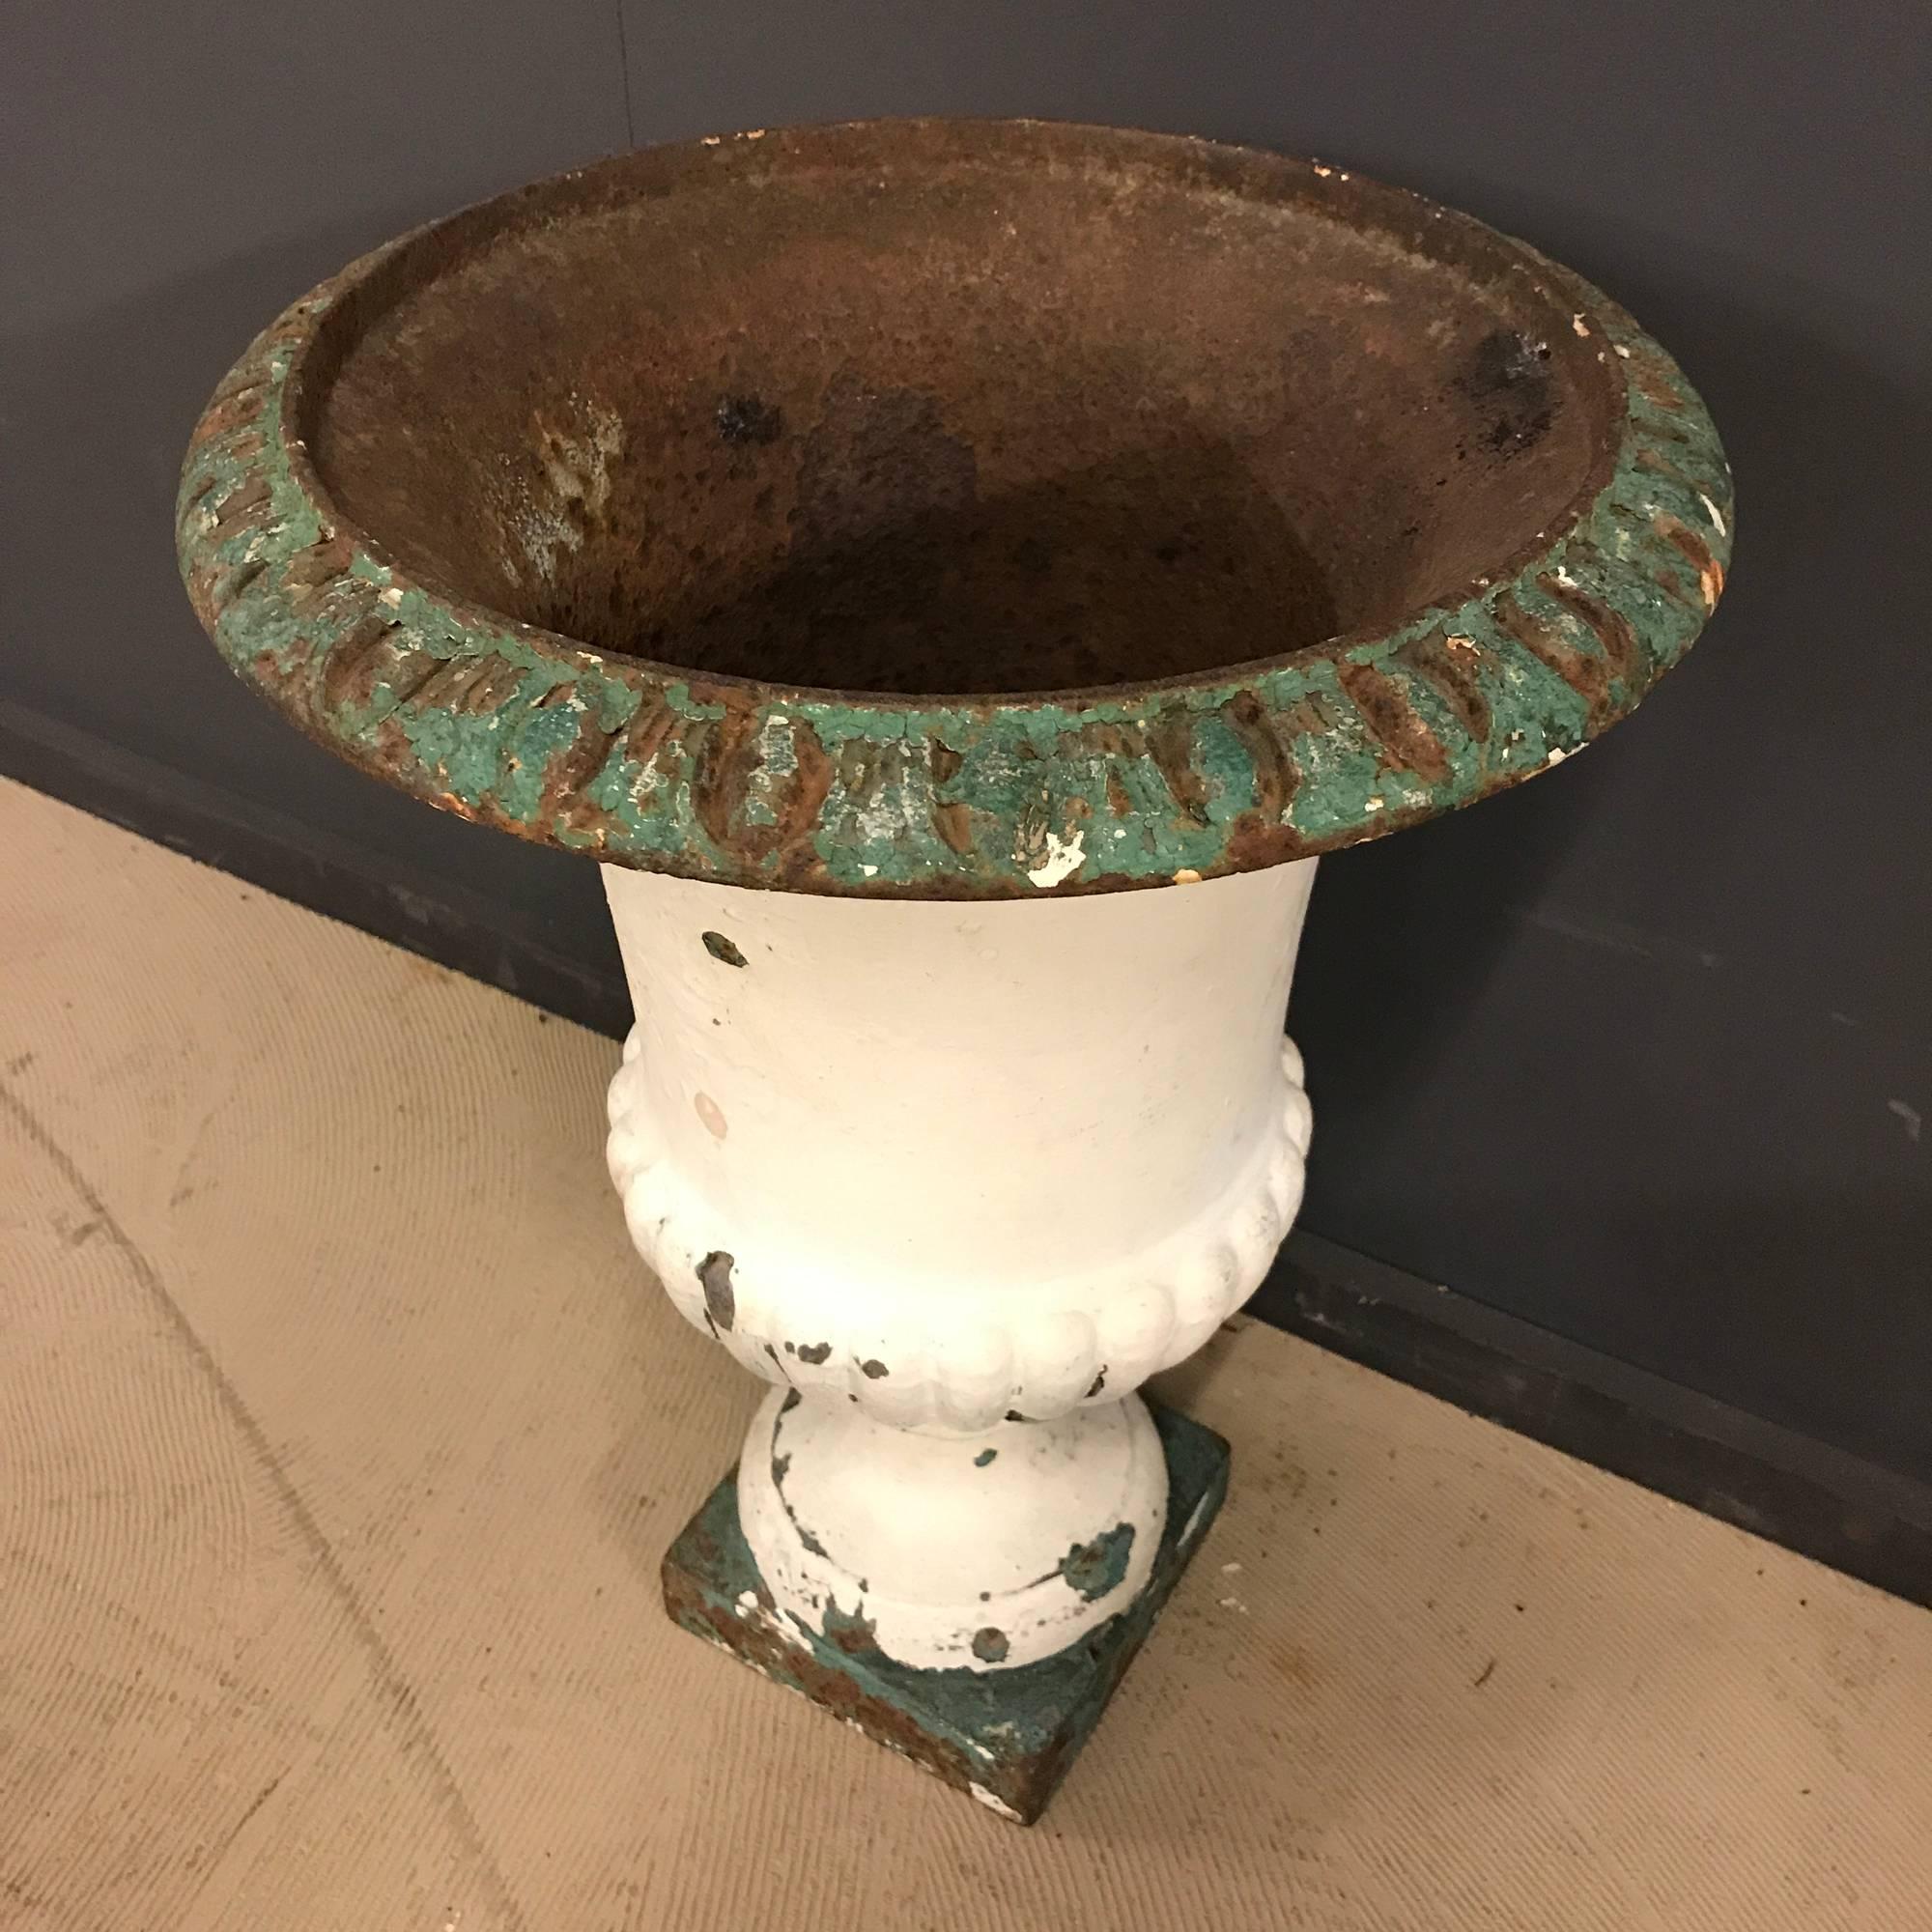 Antique cast iron medicis vase. Multiple layer of old paint and good patina. This item remains in good condition.